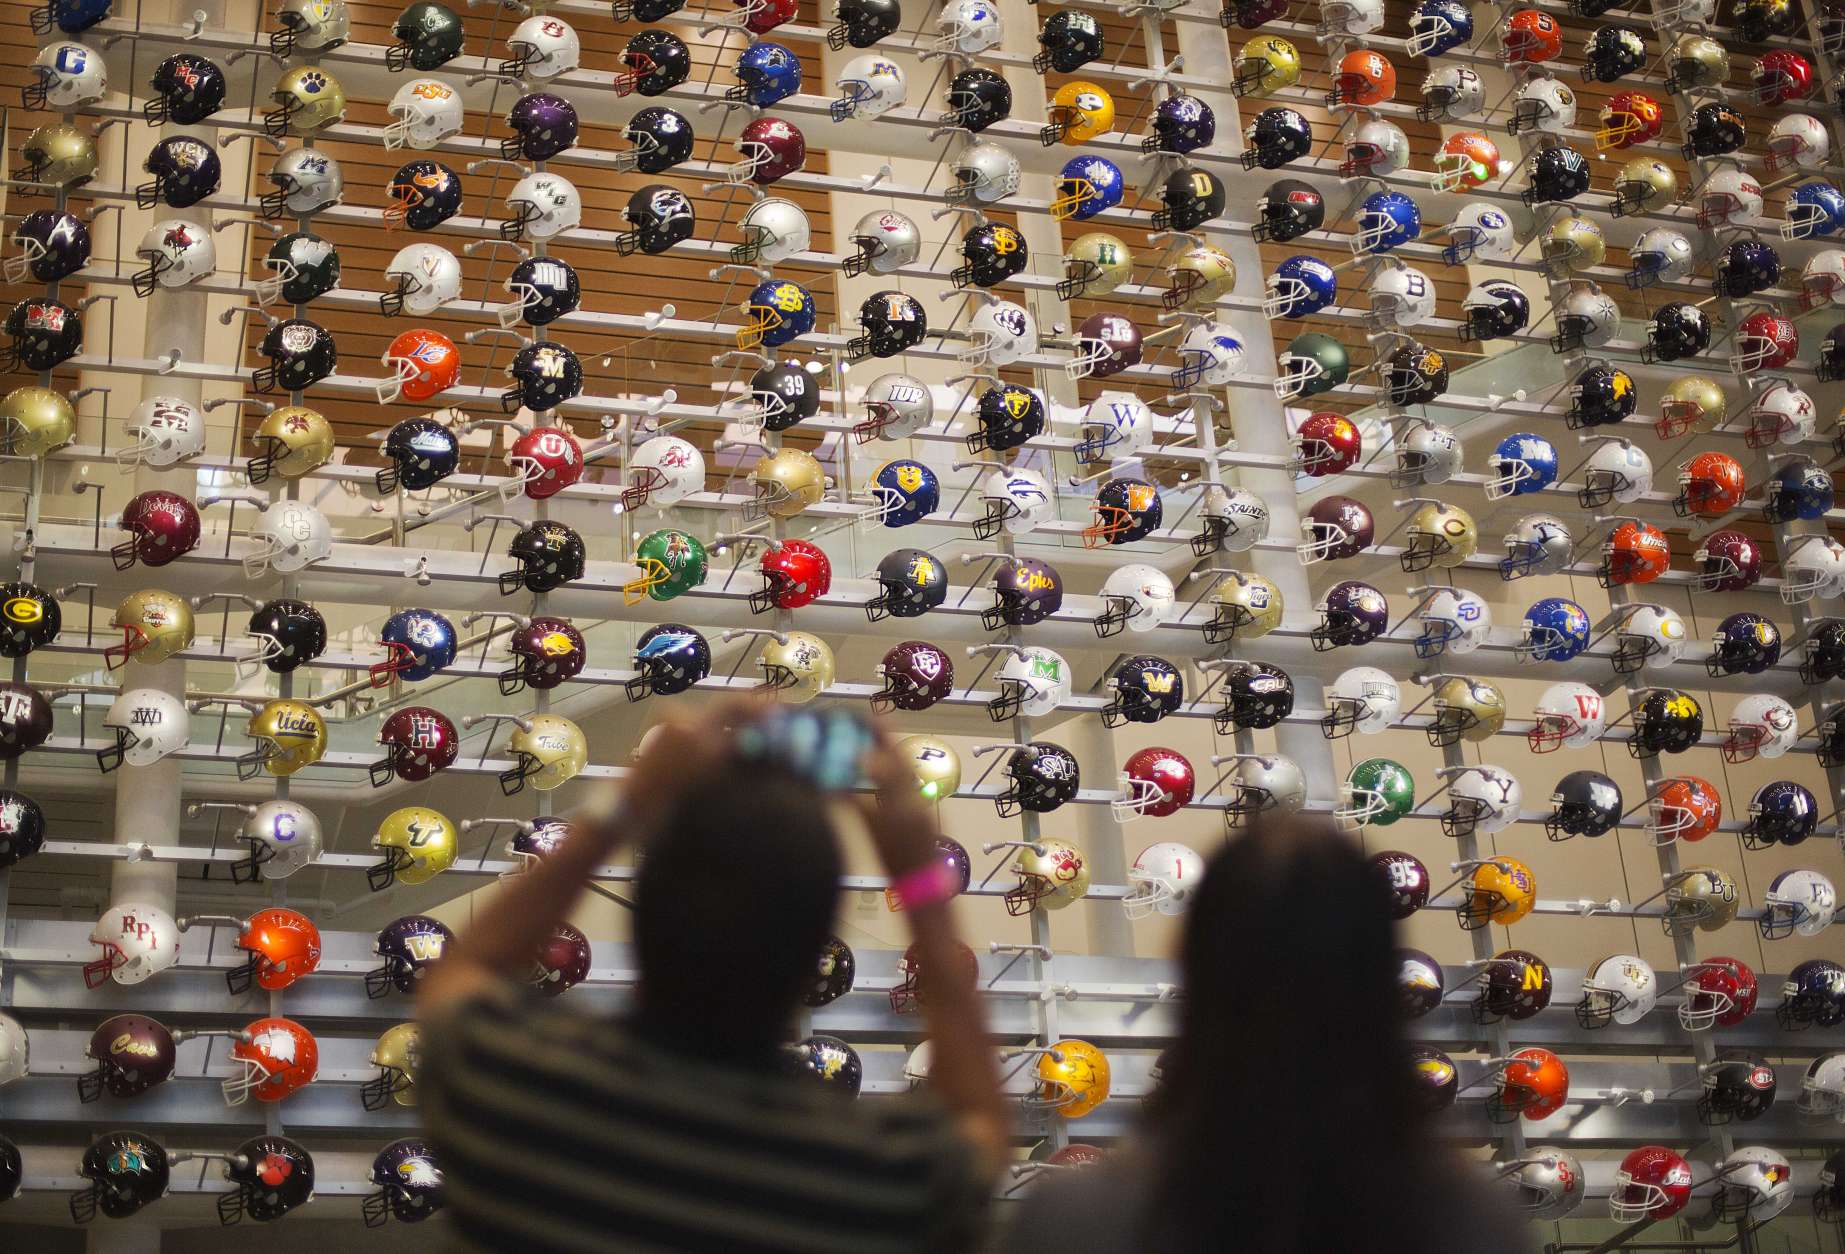 Helmets representing the 768 college football programs in the U.S. are displayed as fans arrive to spend the night in the College Football Hall of Fame, Wednesday, Aug. 13, 2014, in Atlanta. The school associated with a fan's registration card will light up their team's helmet upon swiping the card at the entry to the museum. (AP Photo/David Goldman)